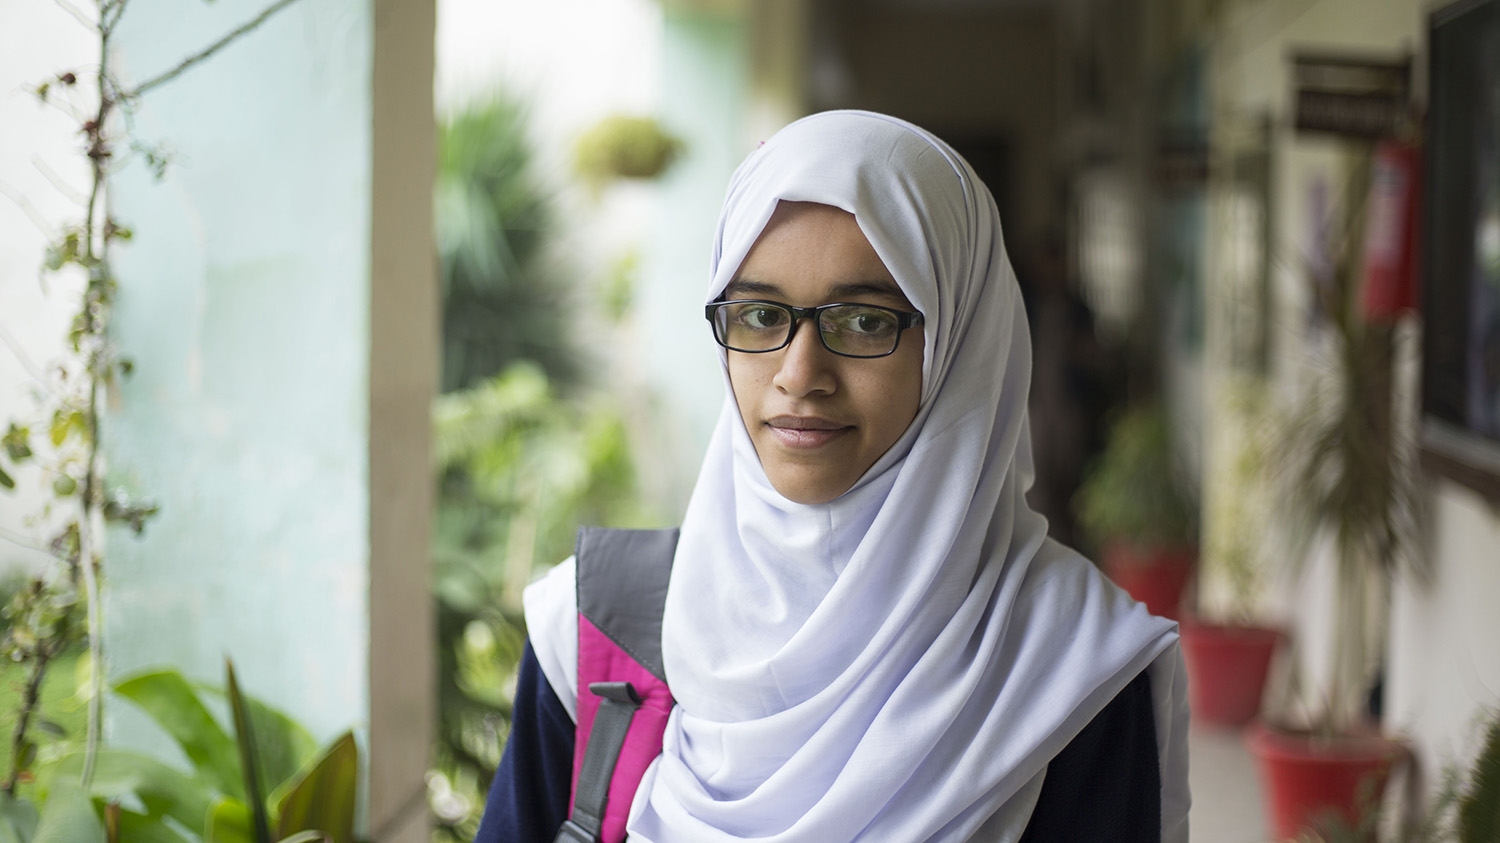 Maryam wears glasses which were prescribed to her after an eye screening by her teacher at school in Islamabad.